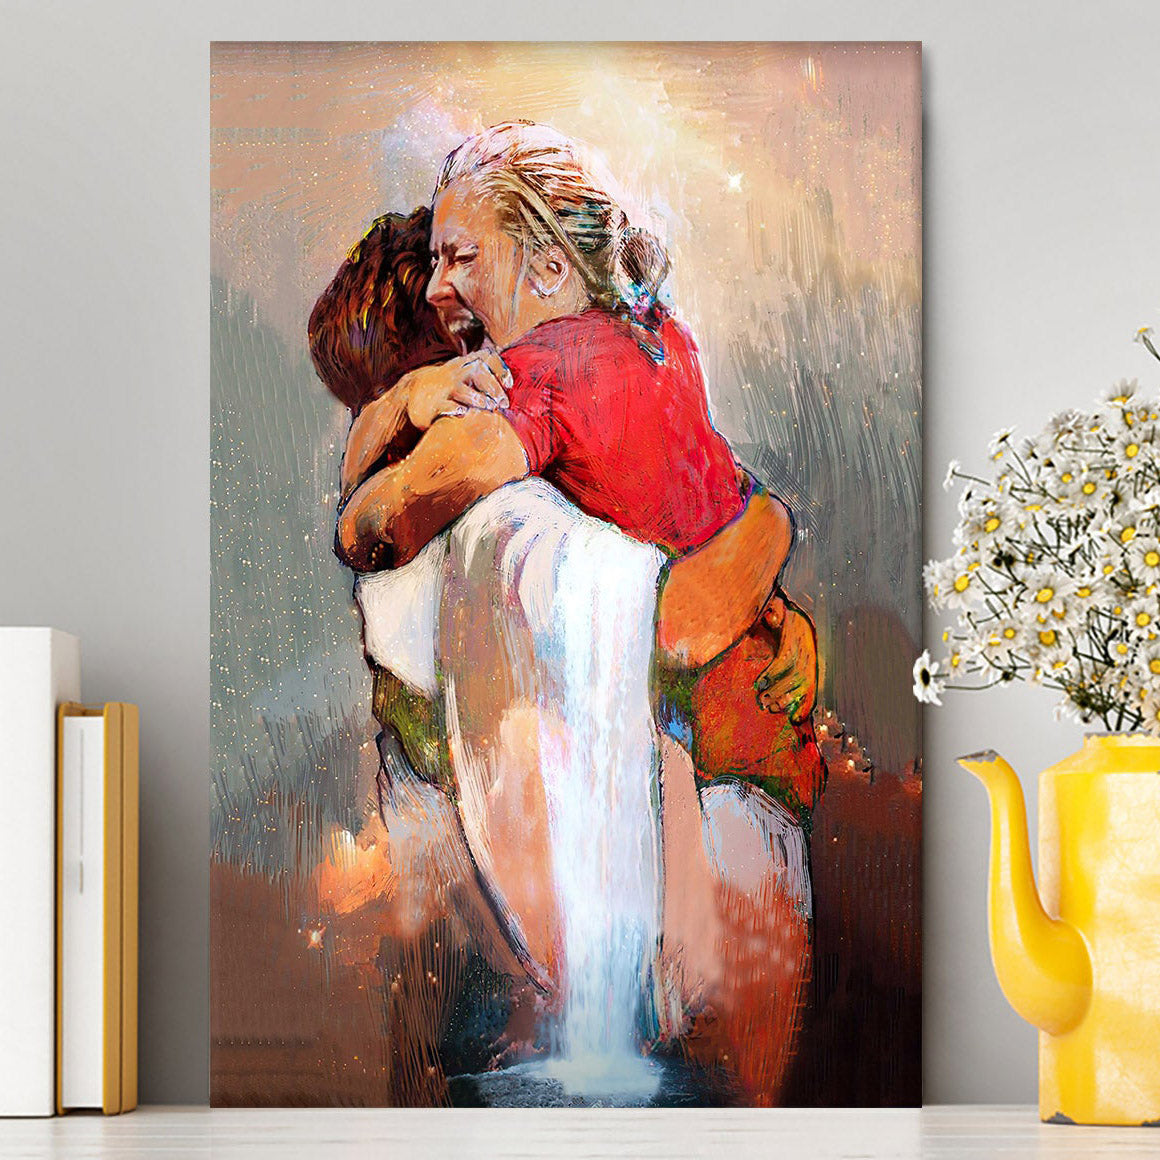 The First Day In Heaven Canvas Wall Art - Jesus Hugs The Girl Canvas - Jesus Canvas Pictures - Christian Canvas Wall Art